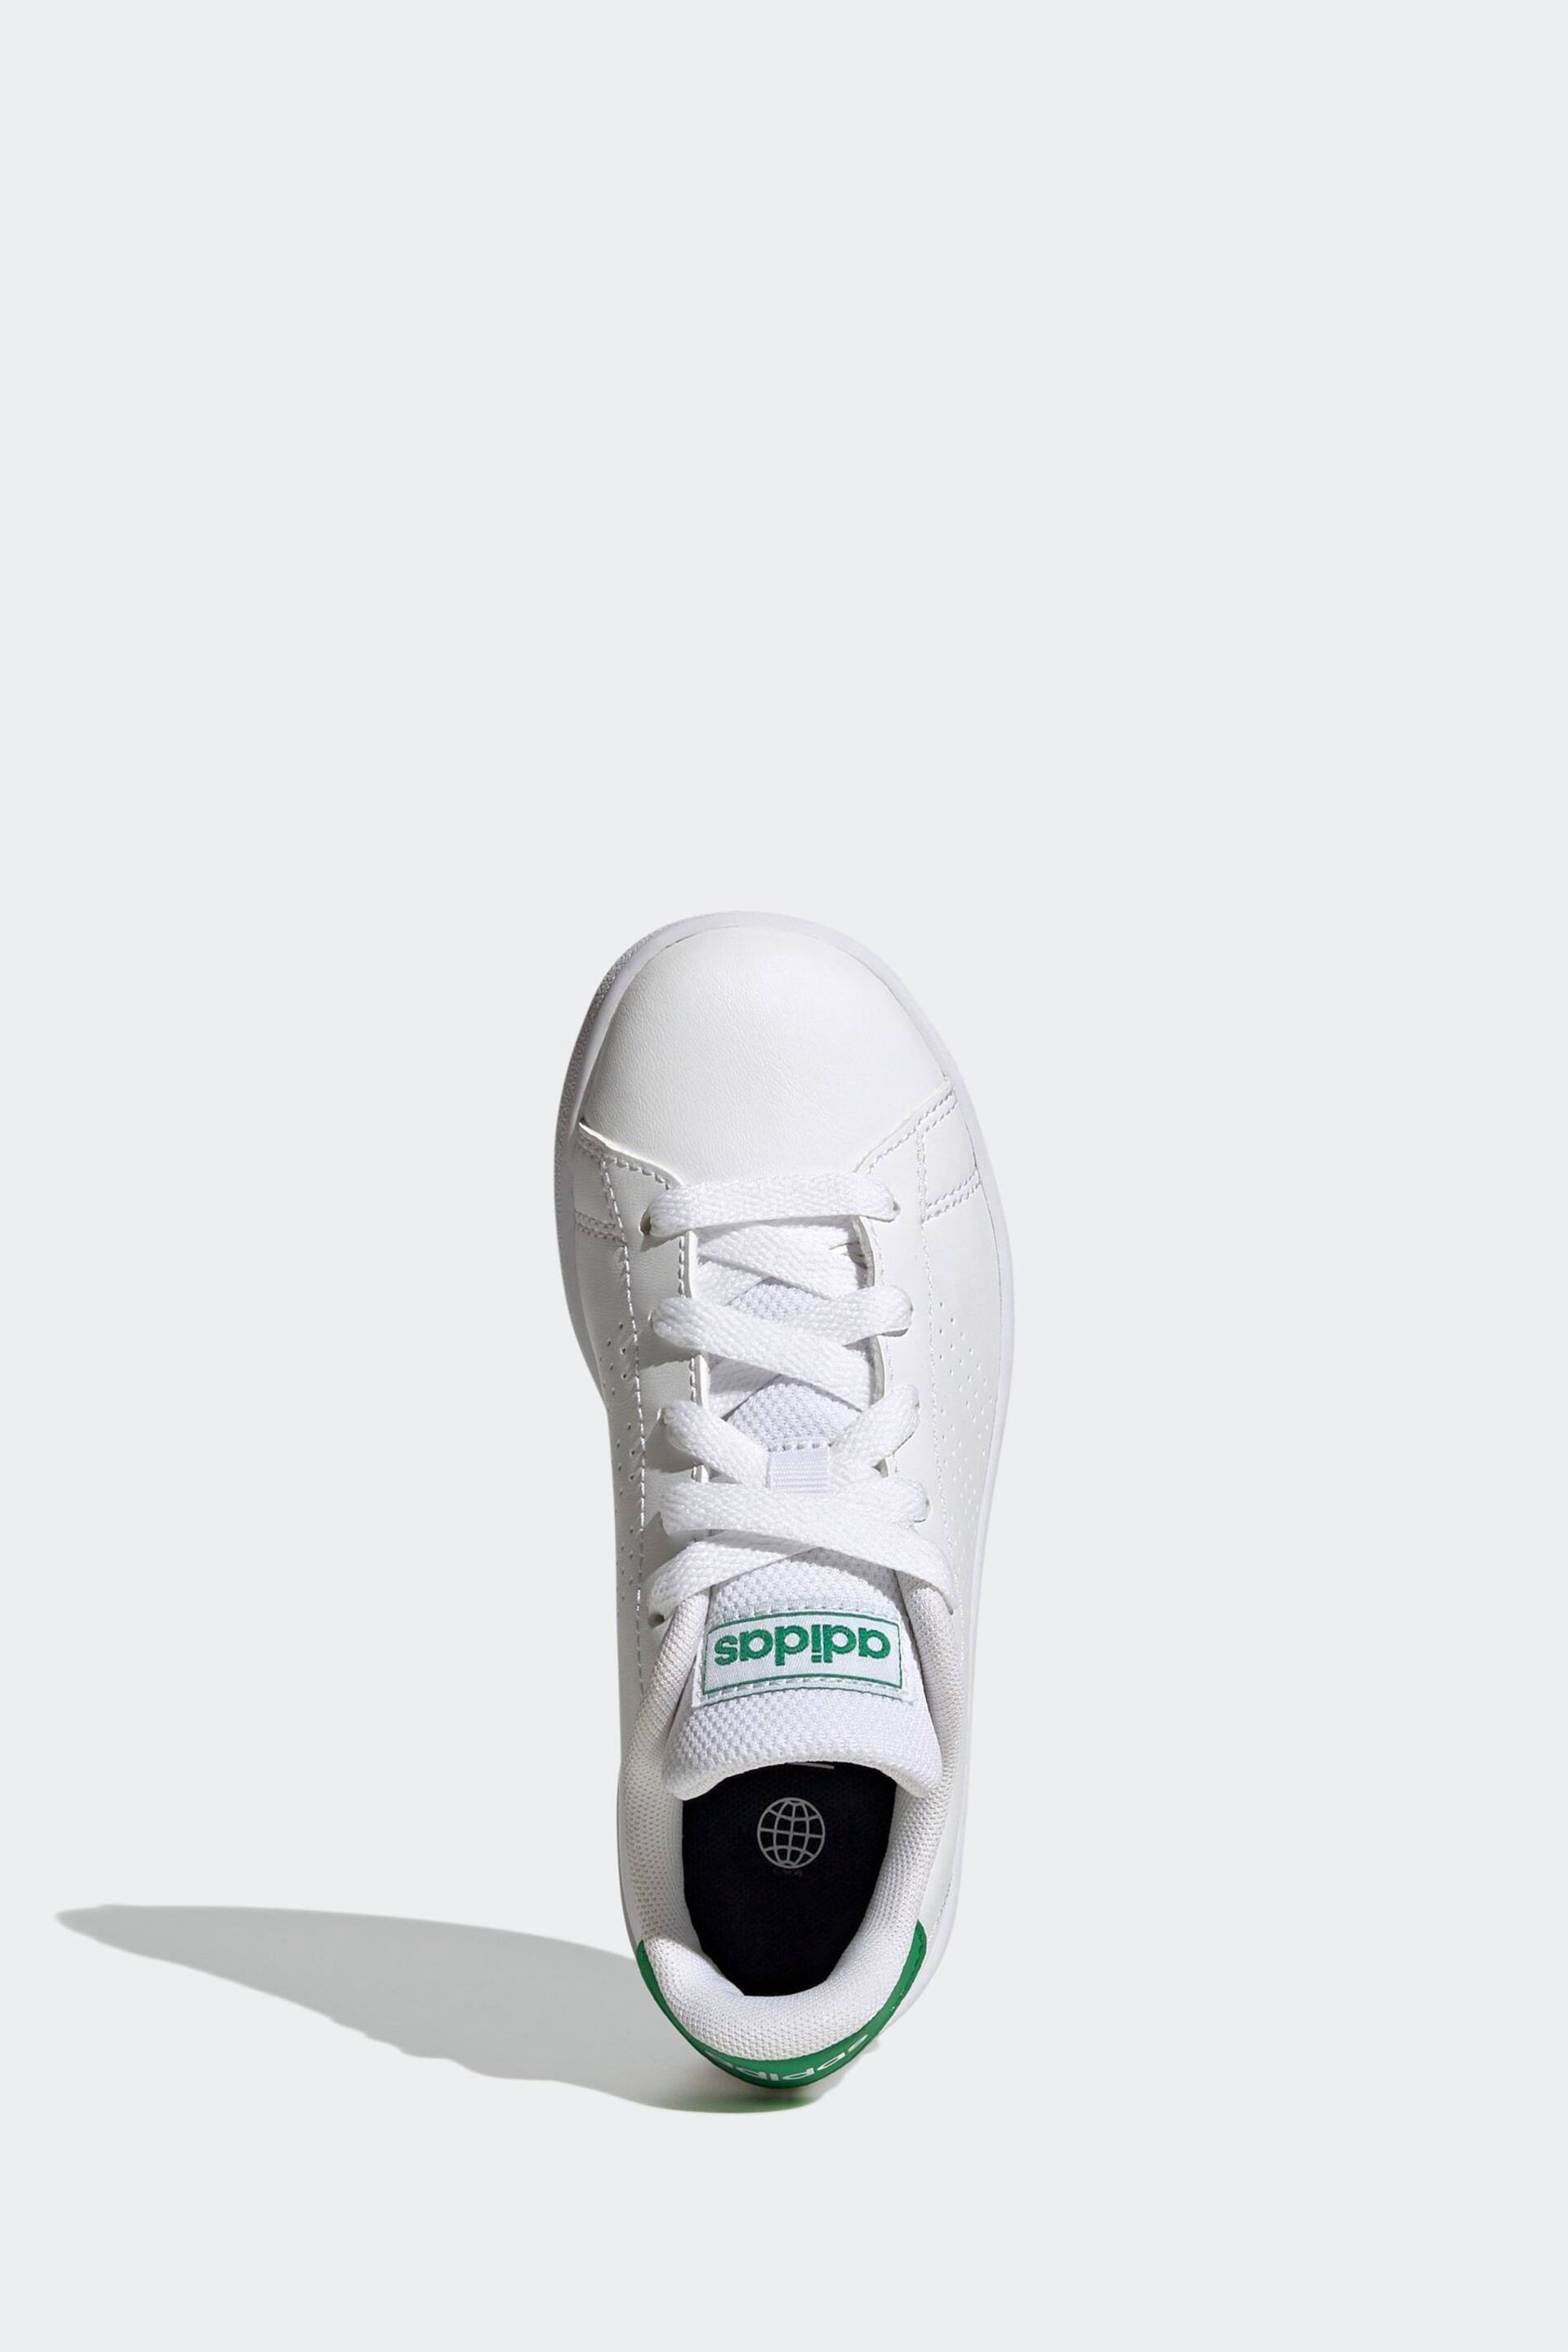 adidas Green/White Sportswear Advantage Lifestyle Court Lace Trainers - Image 6 of 9